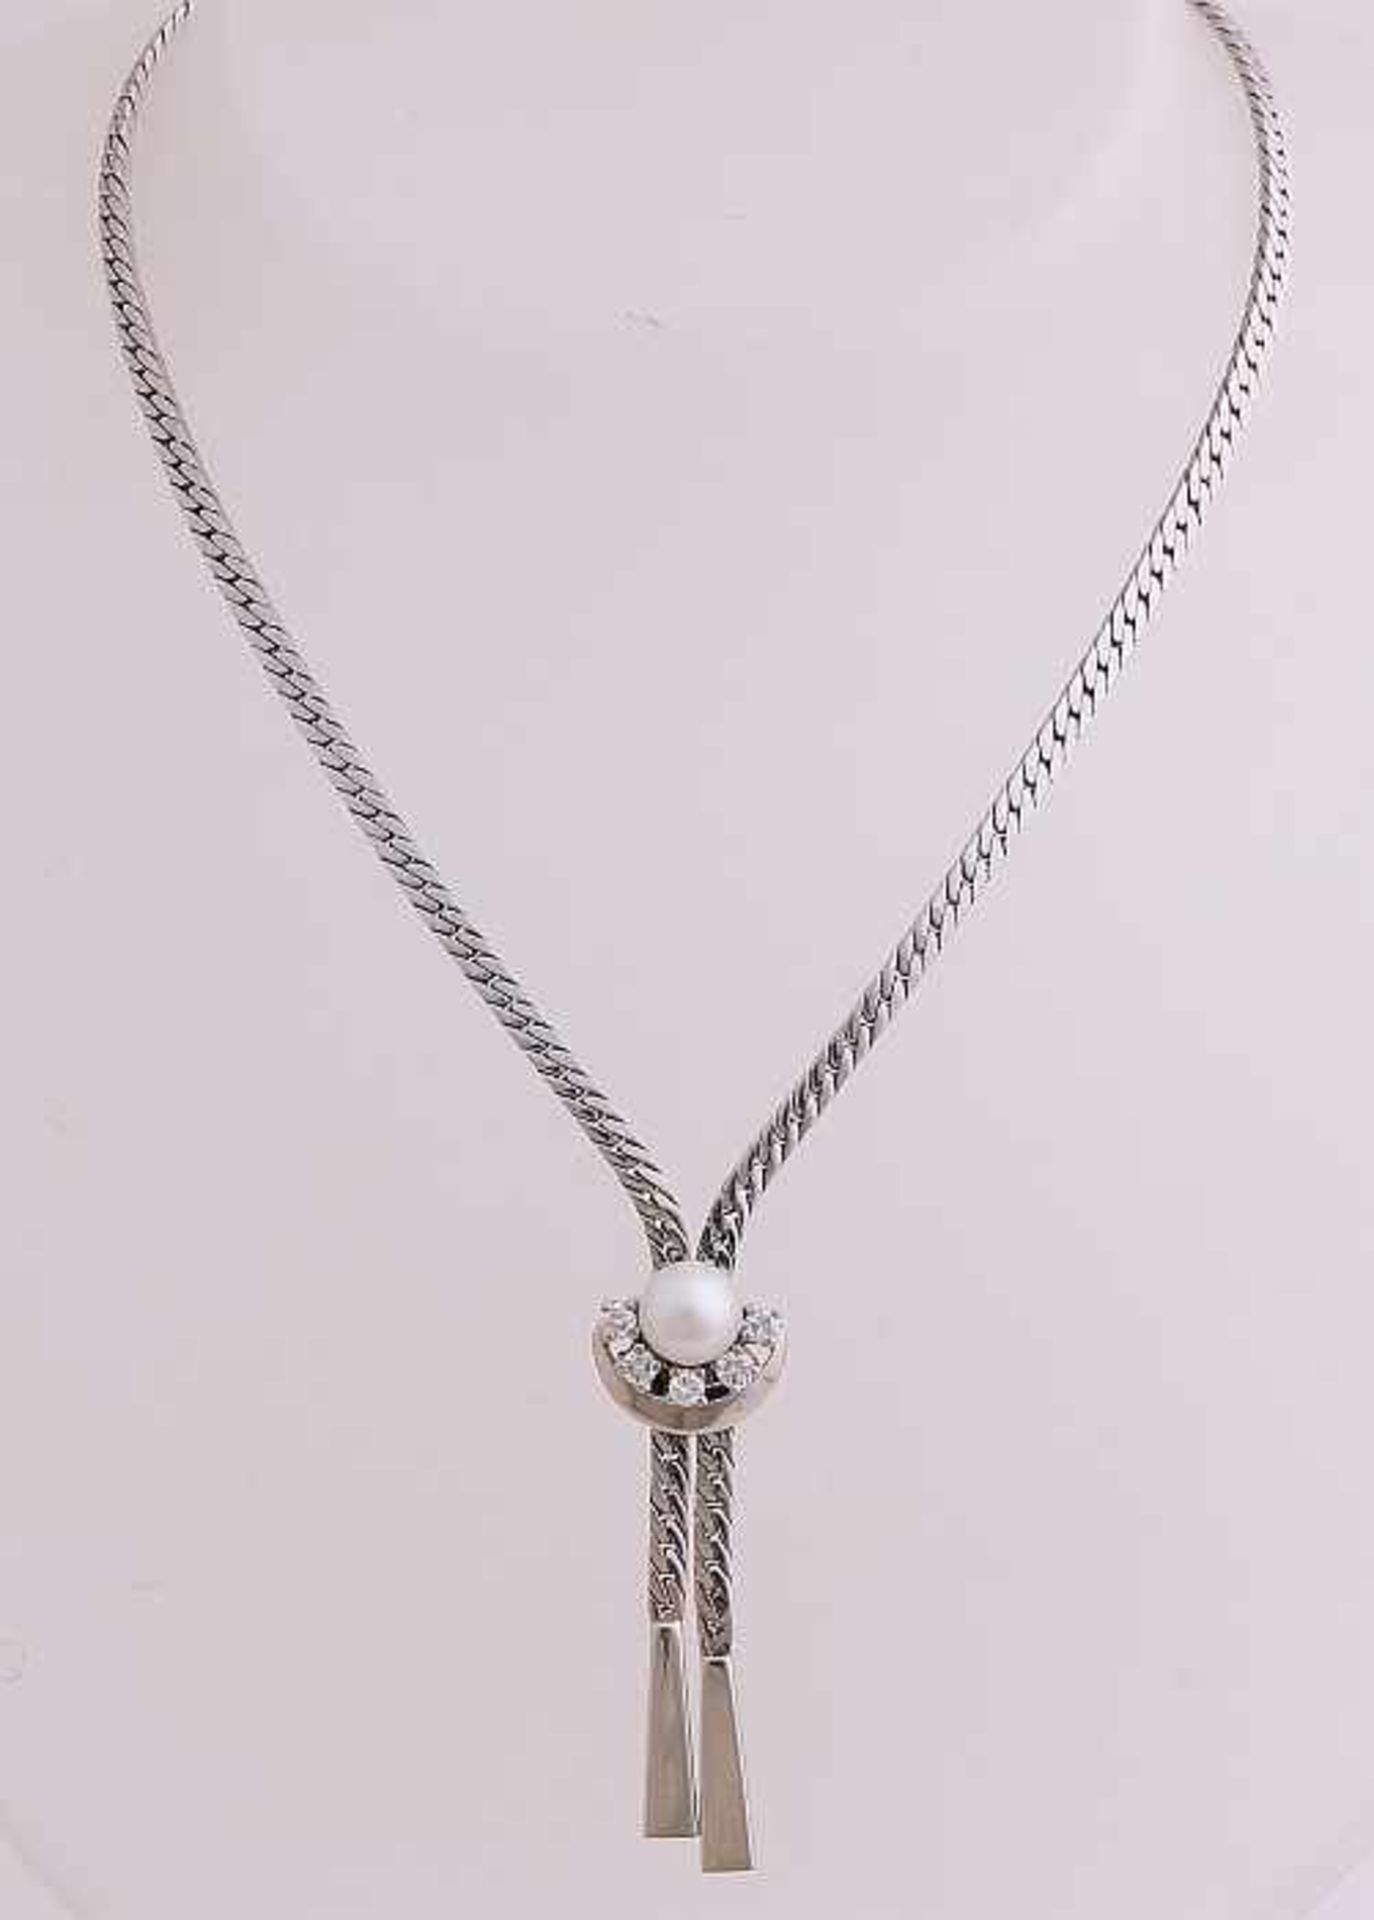 Fine white gold Y-necklace, 585/000, with diamond and pearl. Collier of flat gourmet links extending